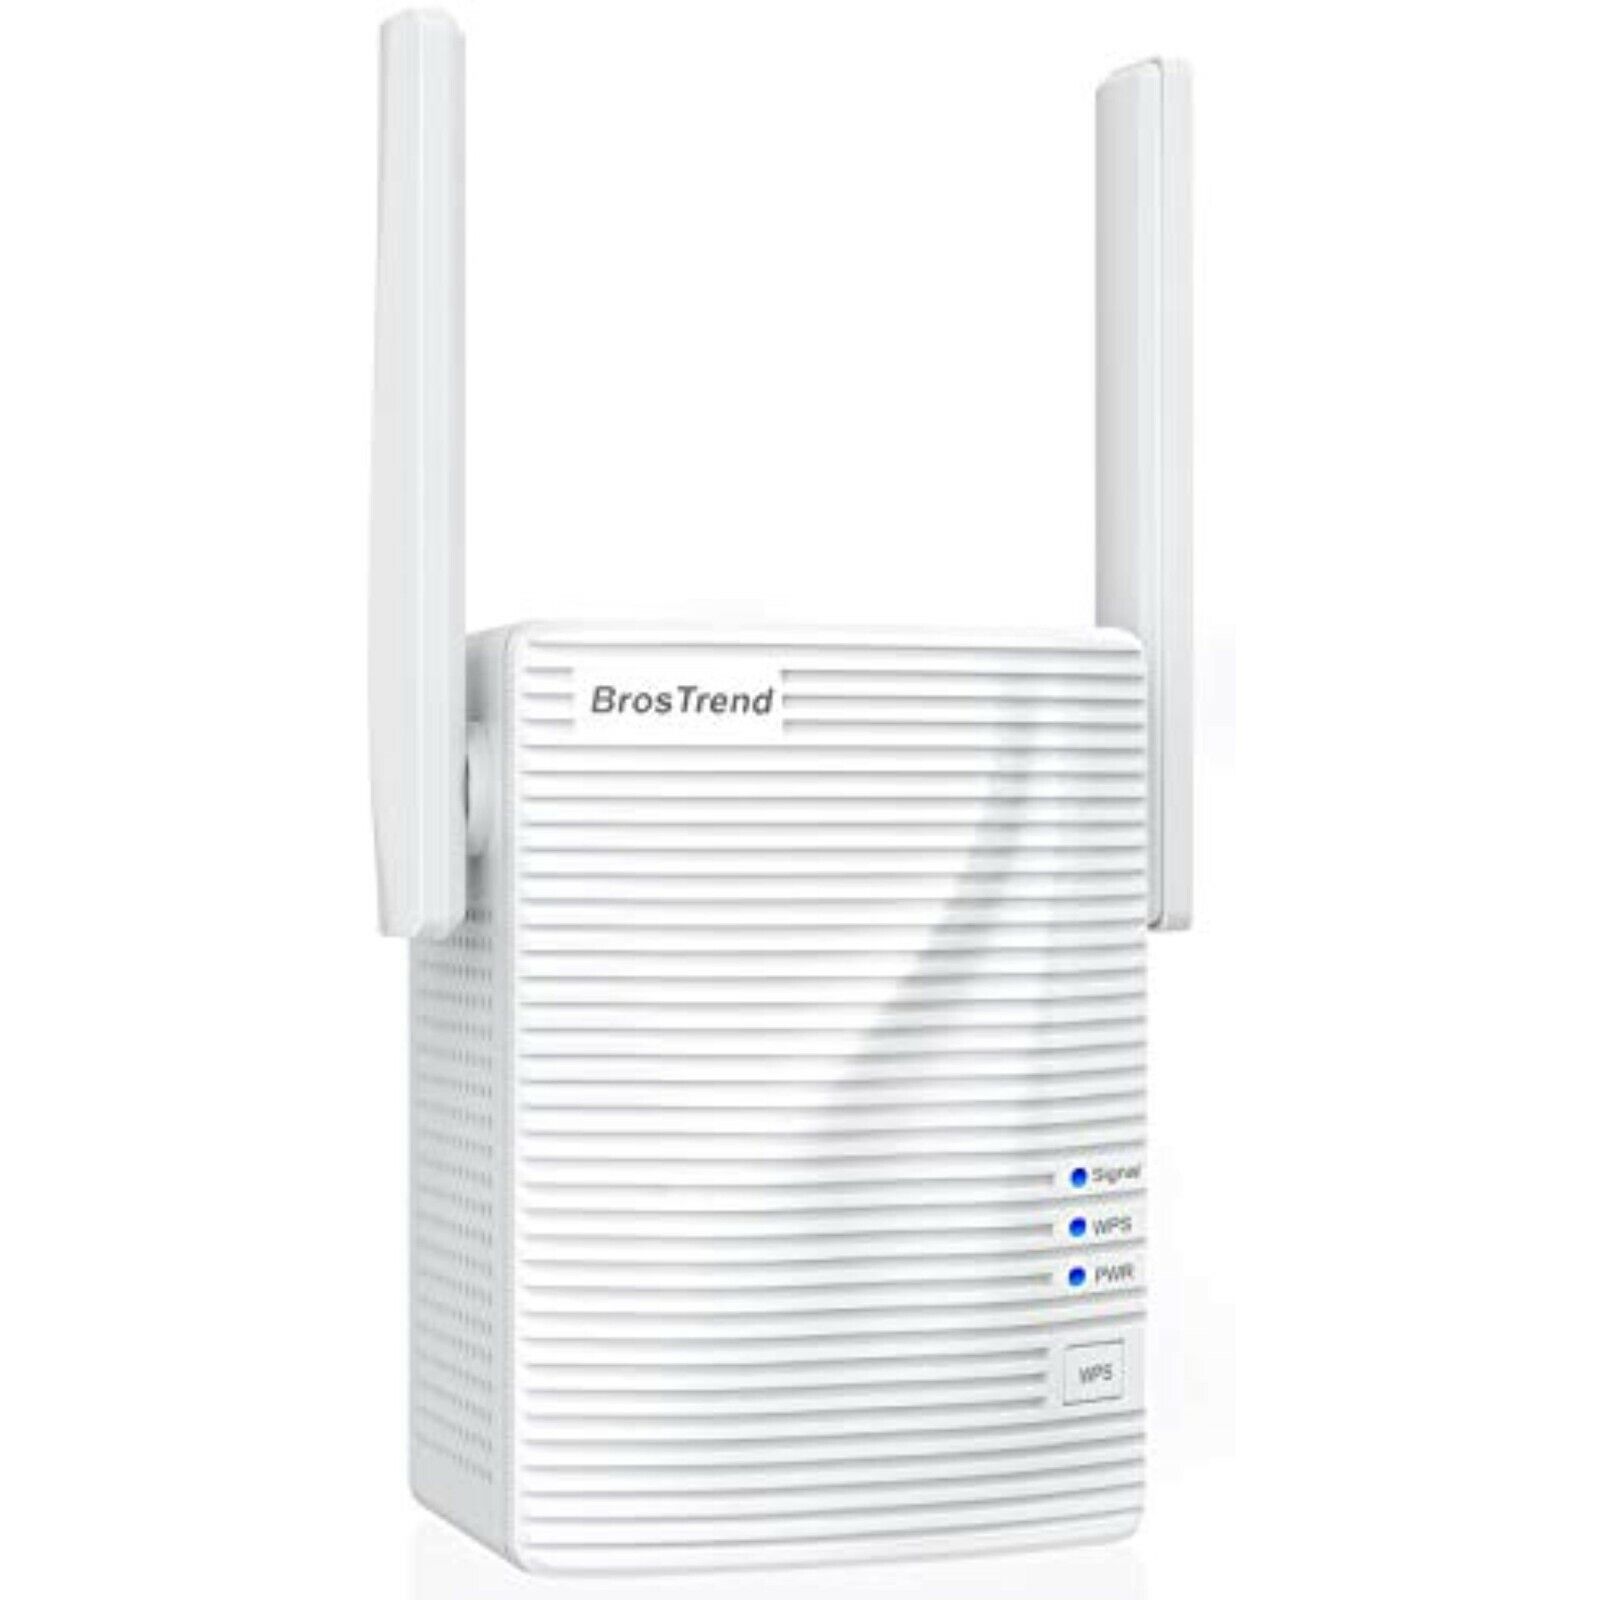 1200Mbps WiFi Range Extender Signal Booster Repeater Coverage External Antennas